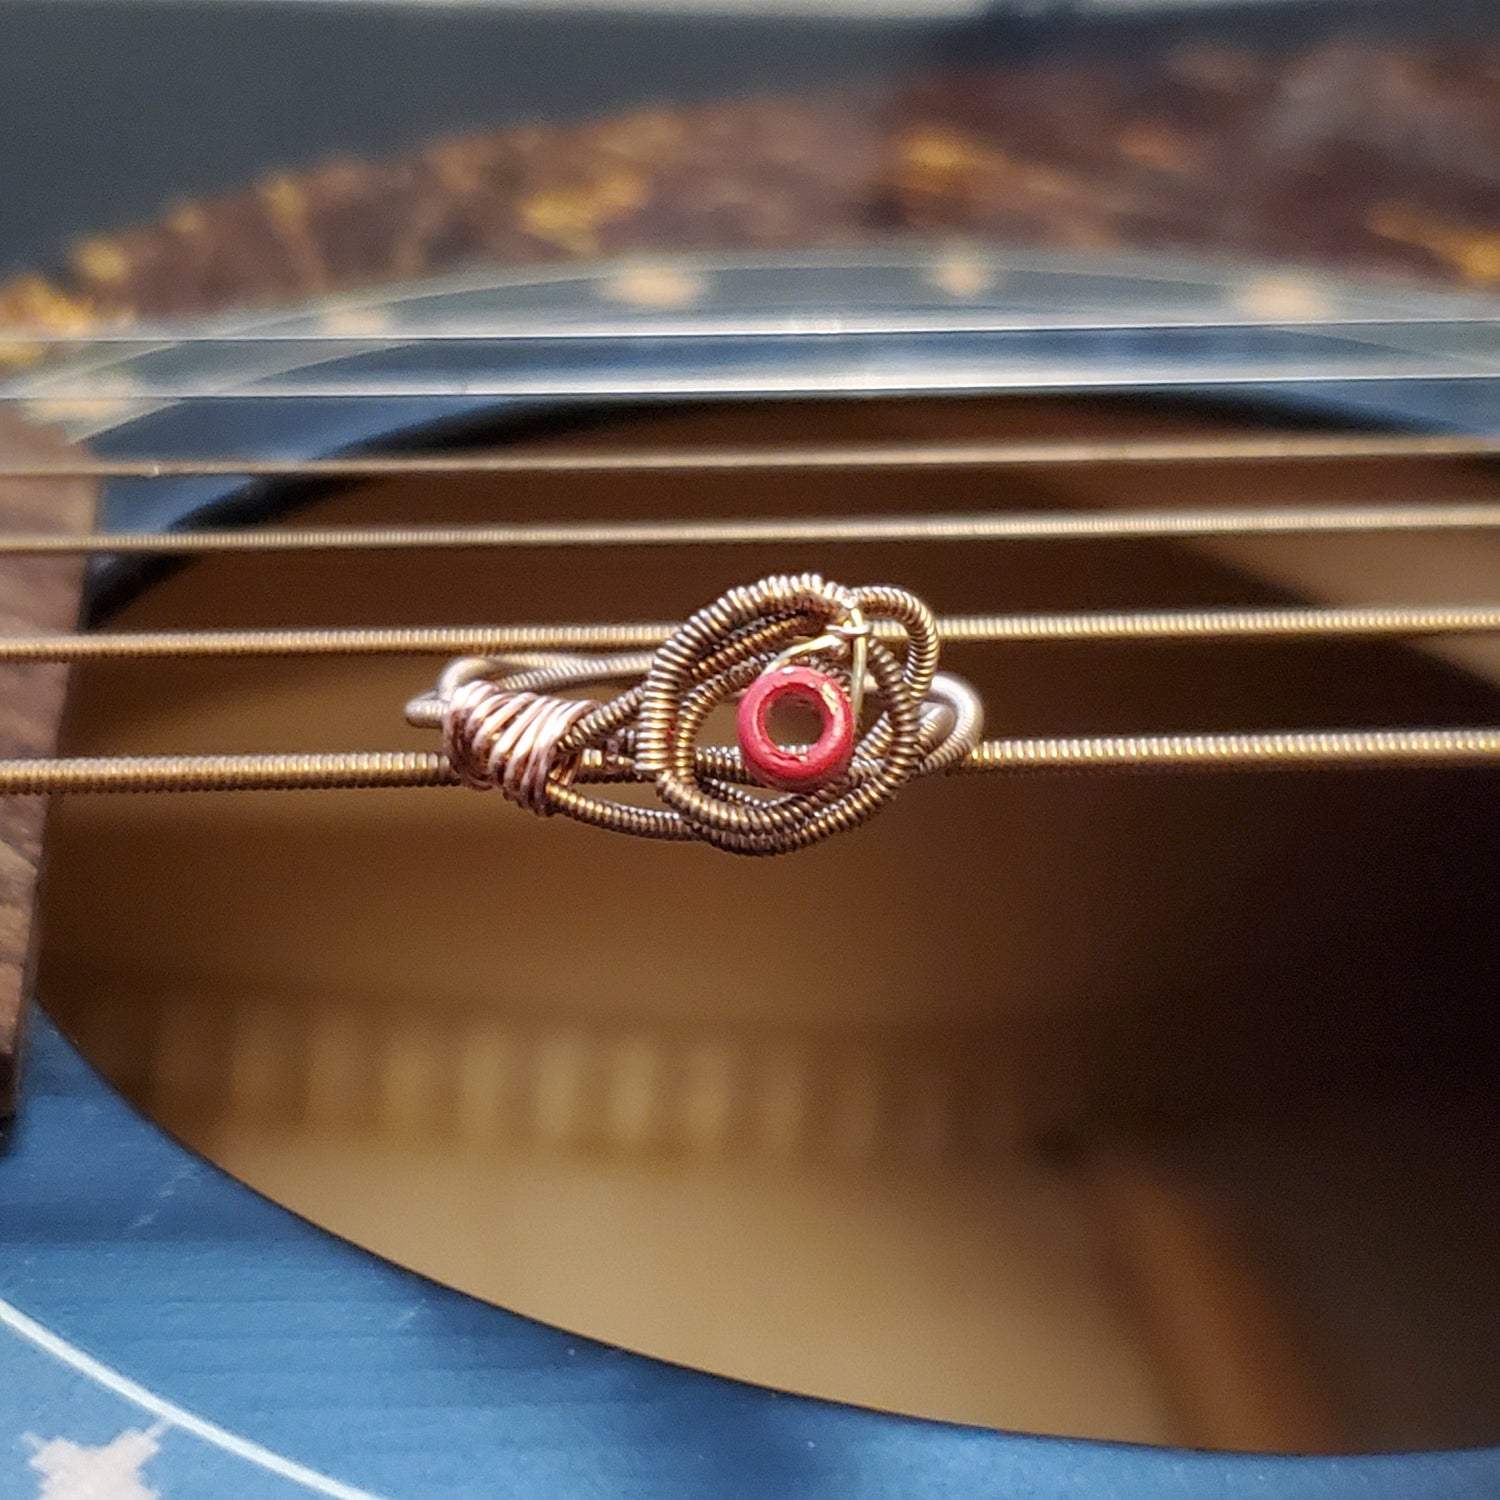 top view of a ing in the shape of a rose, made from an upcycled guitar string -ring is lying on top of a black guitar's strings